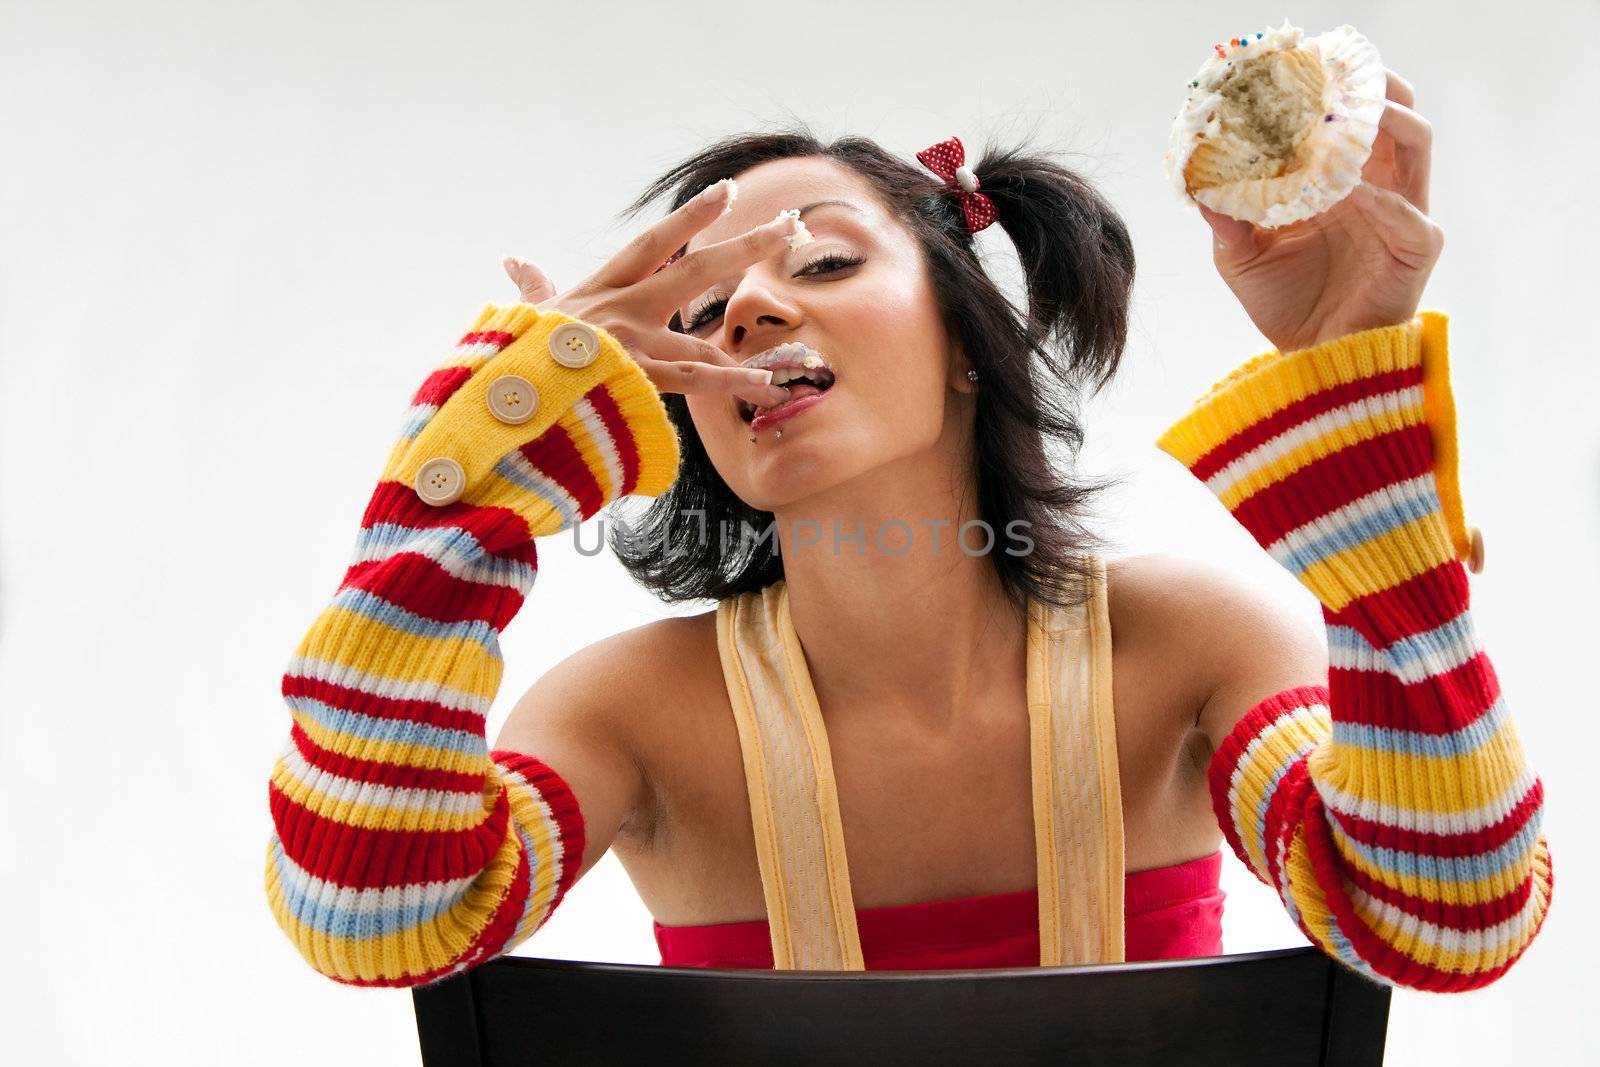 Beautiful Latina girl eating a cupcake licking her fingers and her icing covered lip, isolated